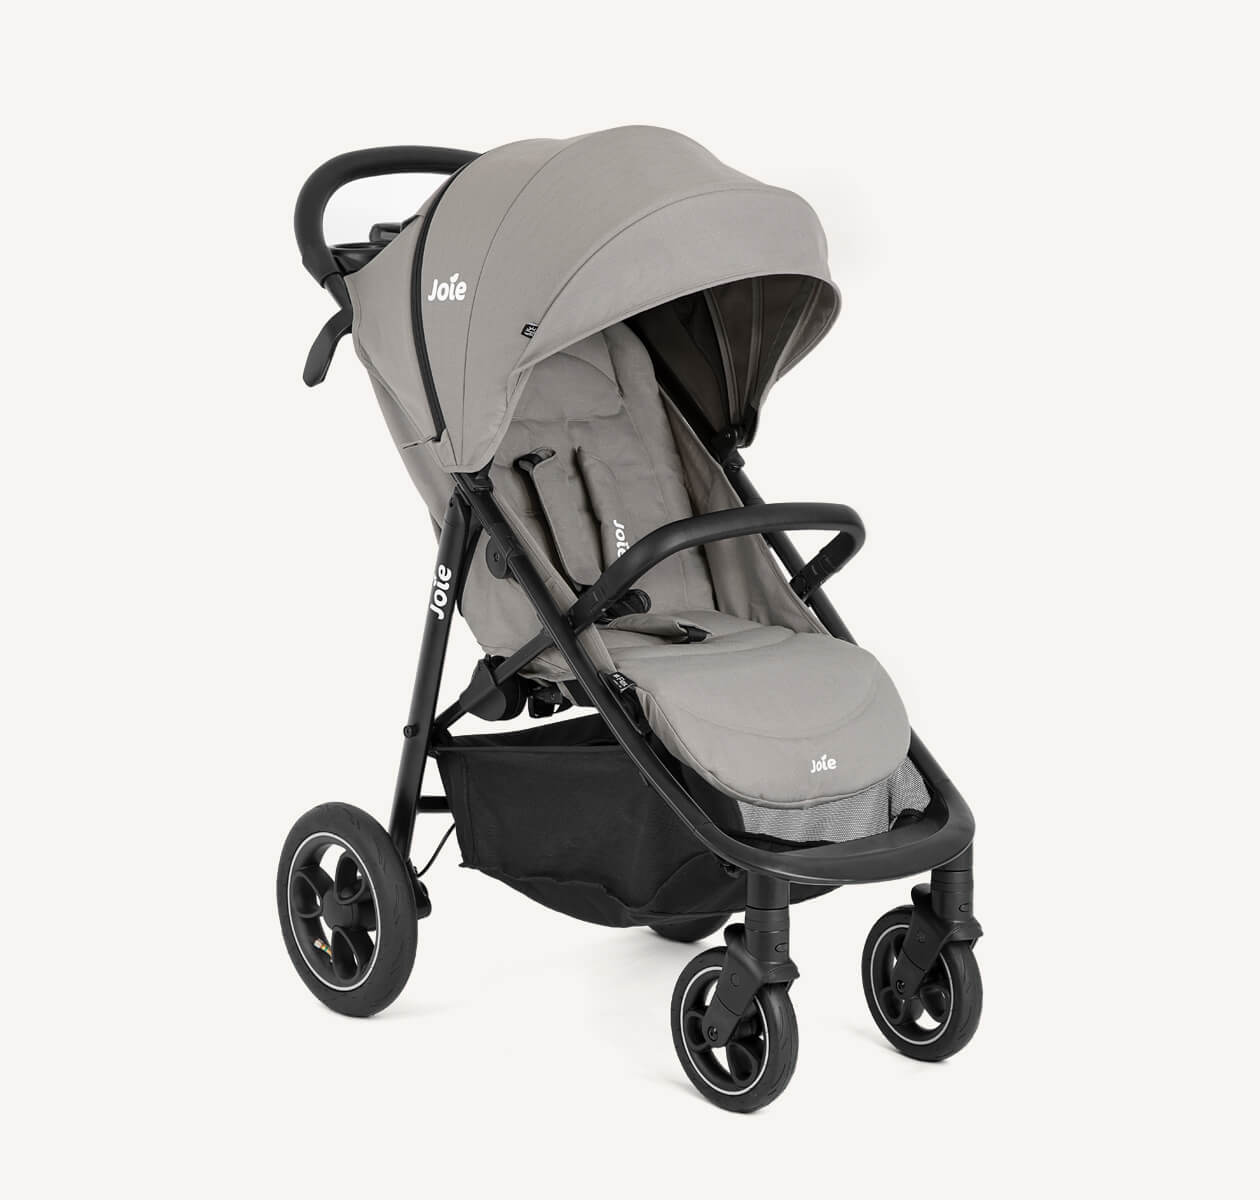 Joie gray litetrax pro air stroller at an angle